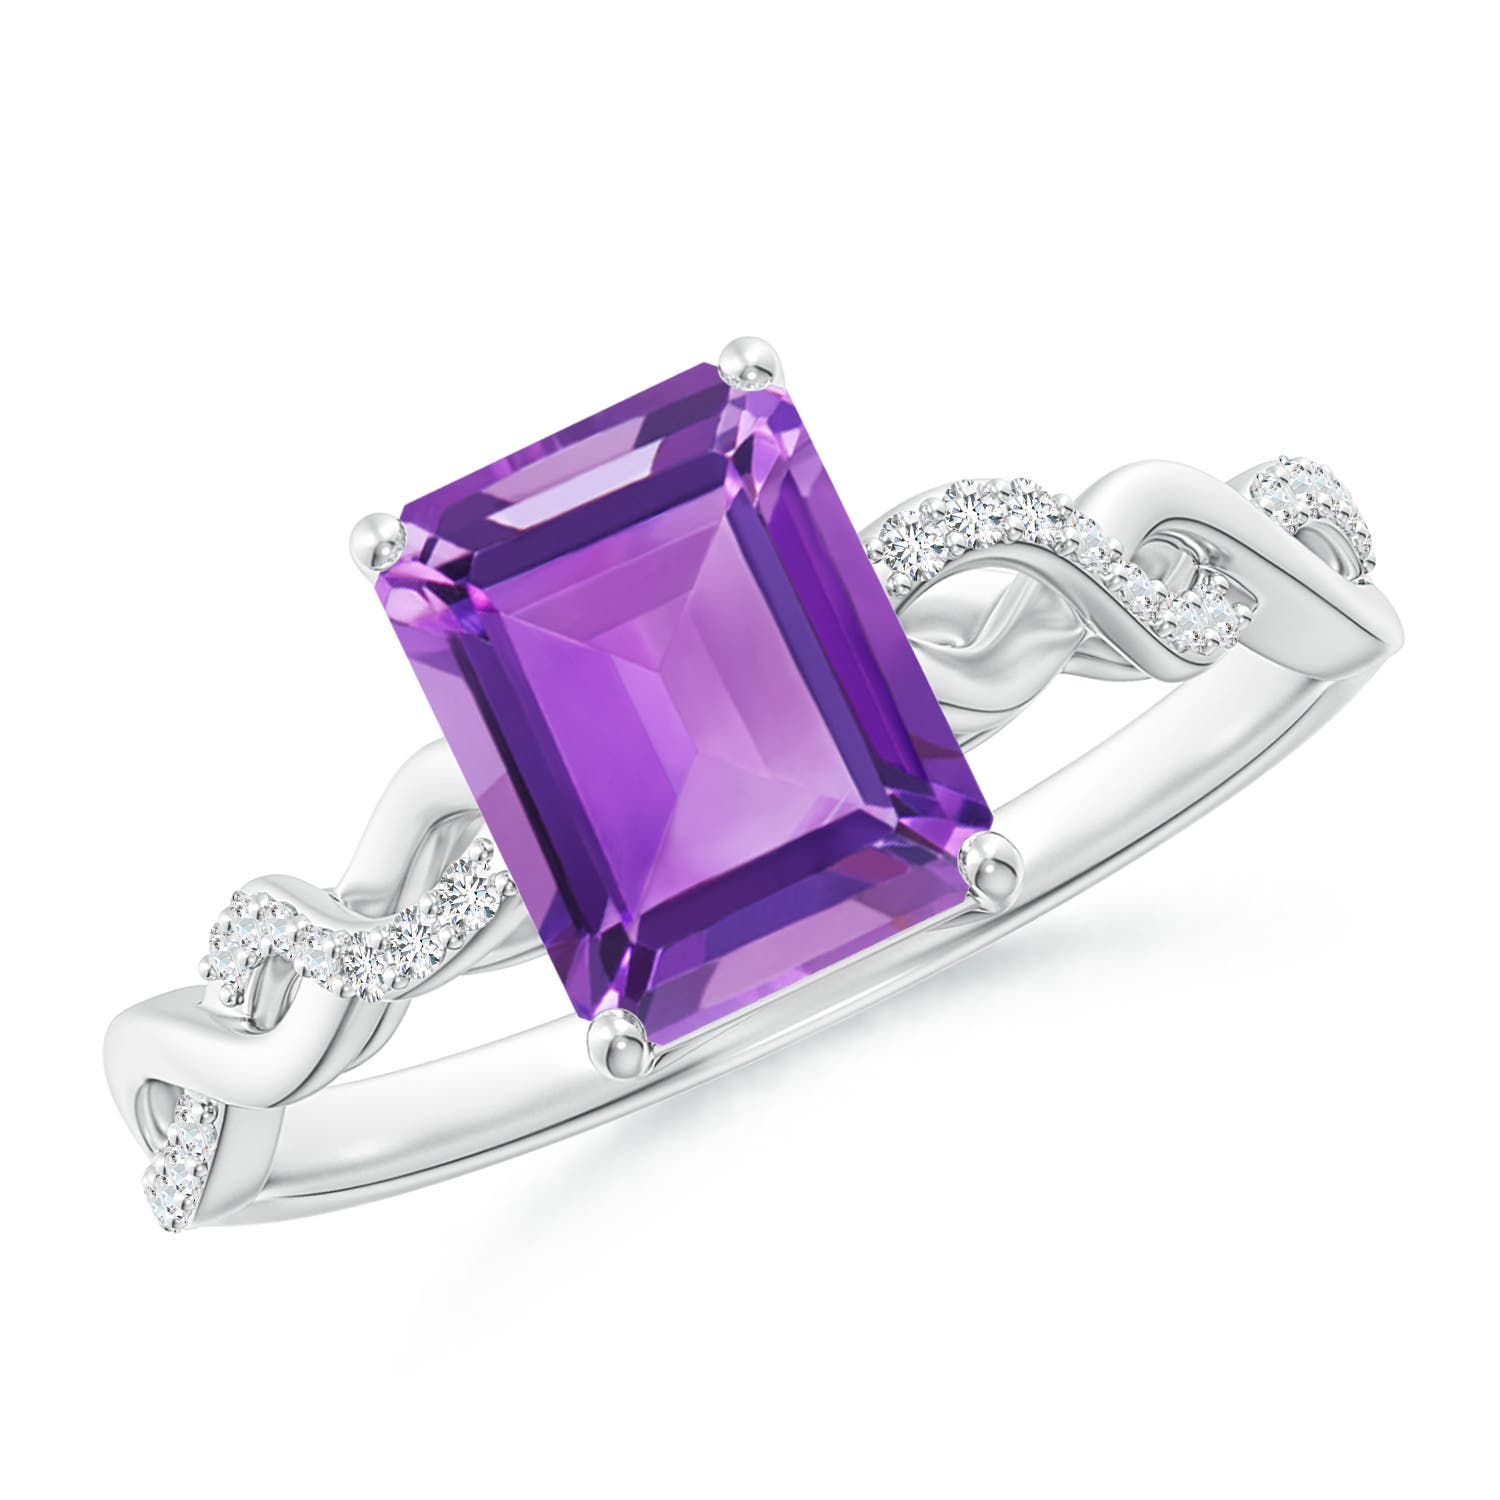 AA - Amethyst / 1.63 CT / 14 KT White Gold